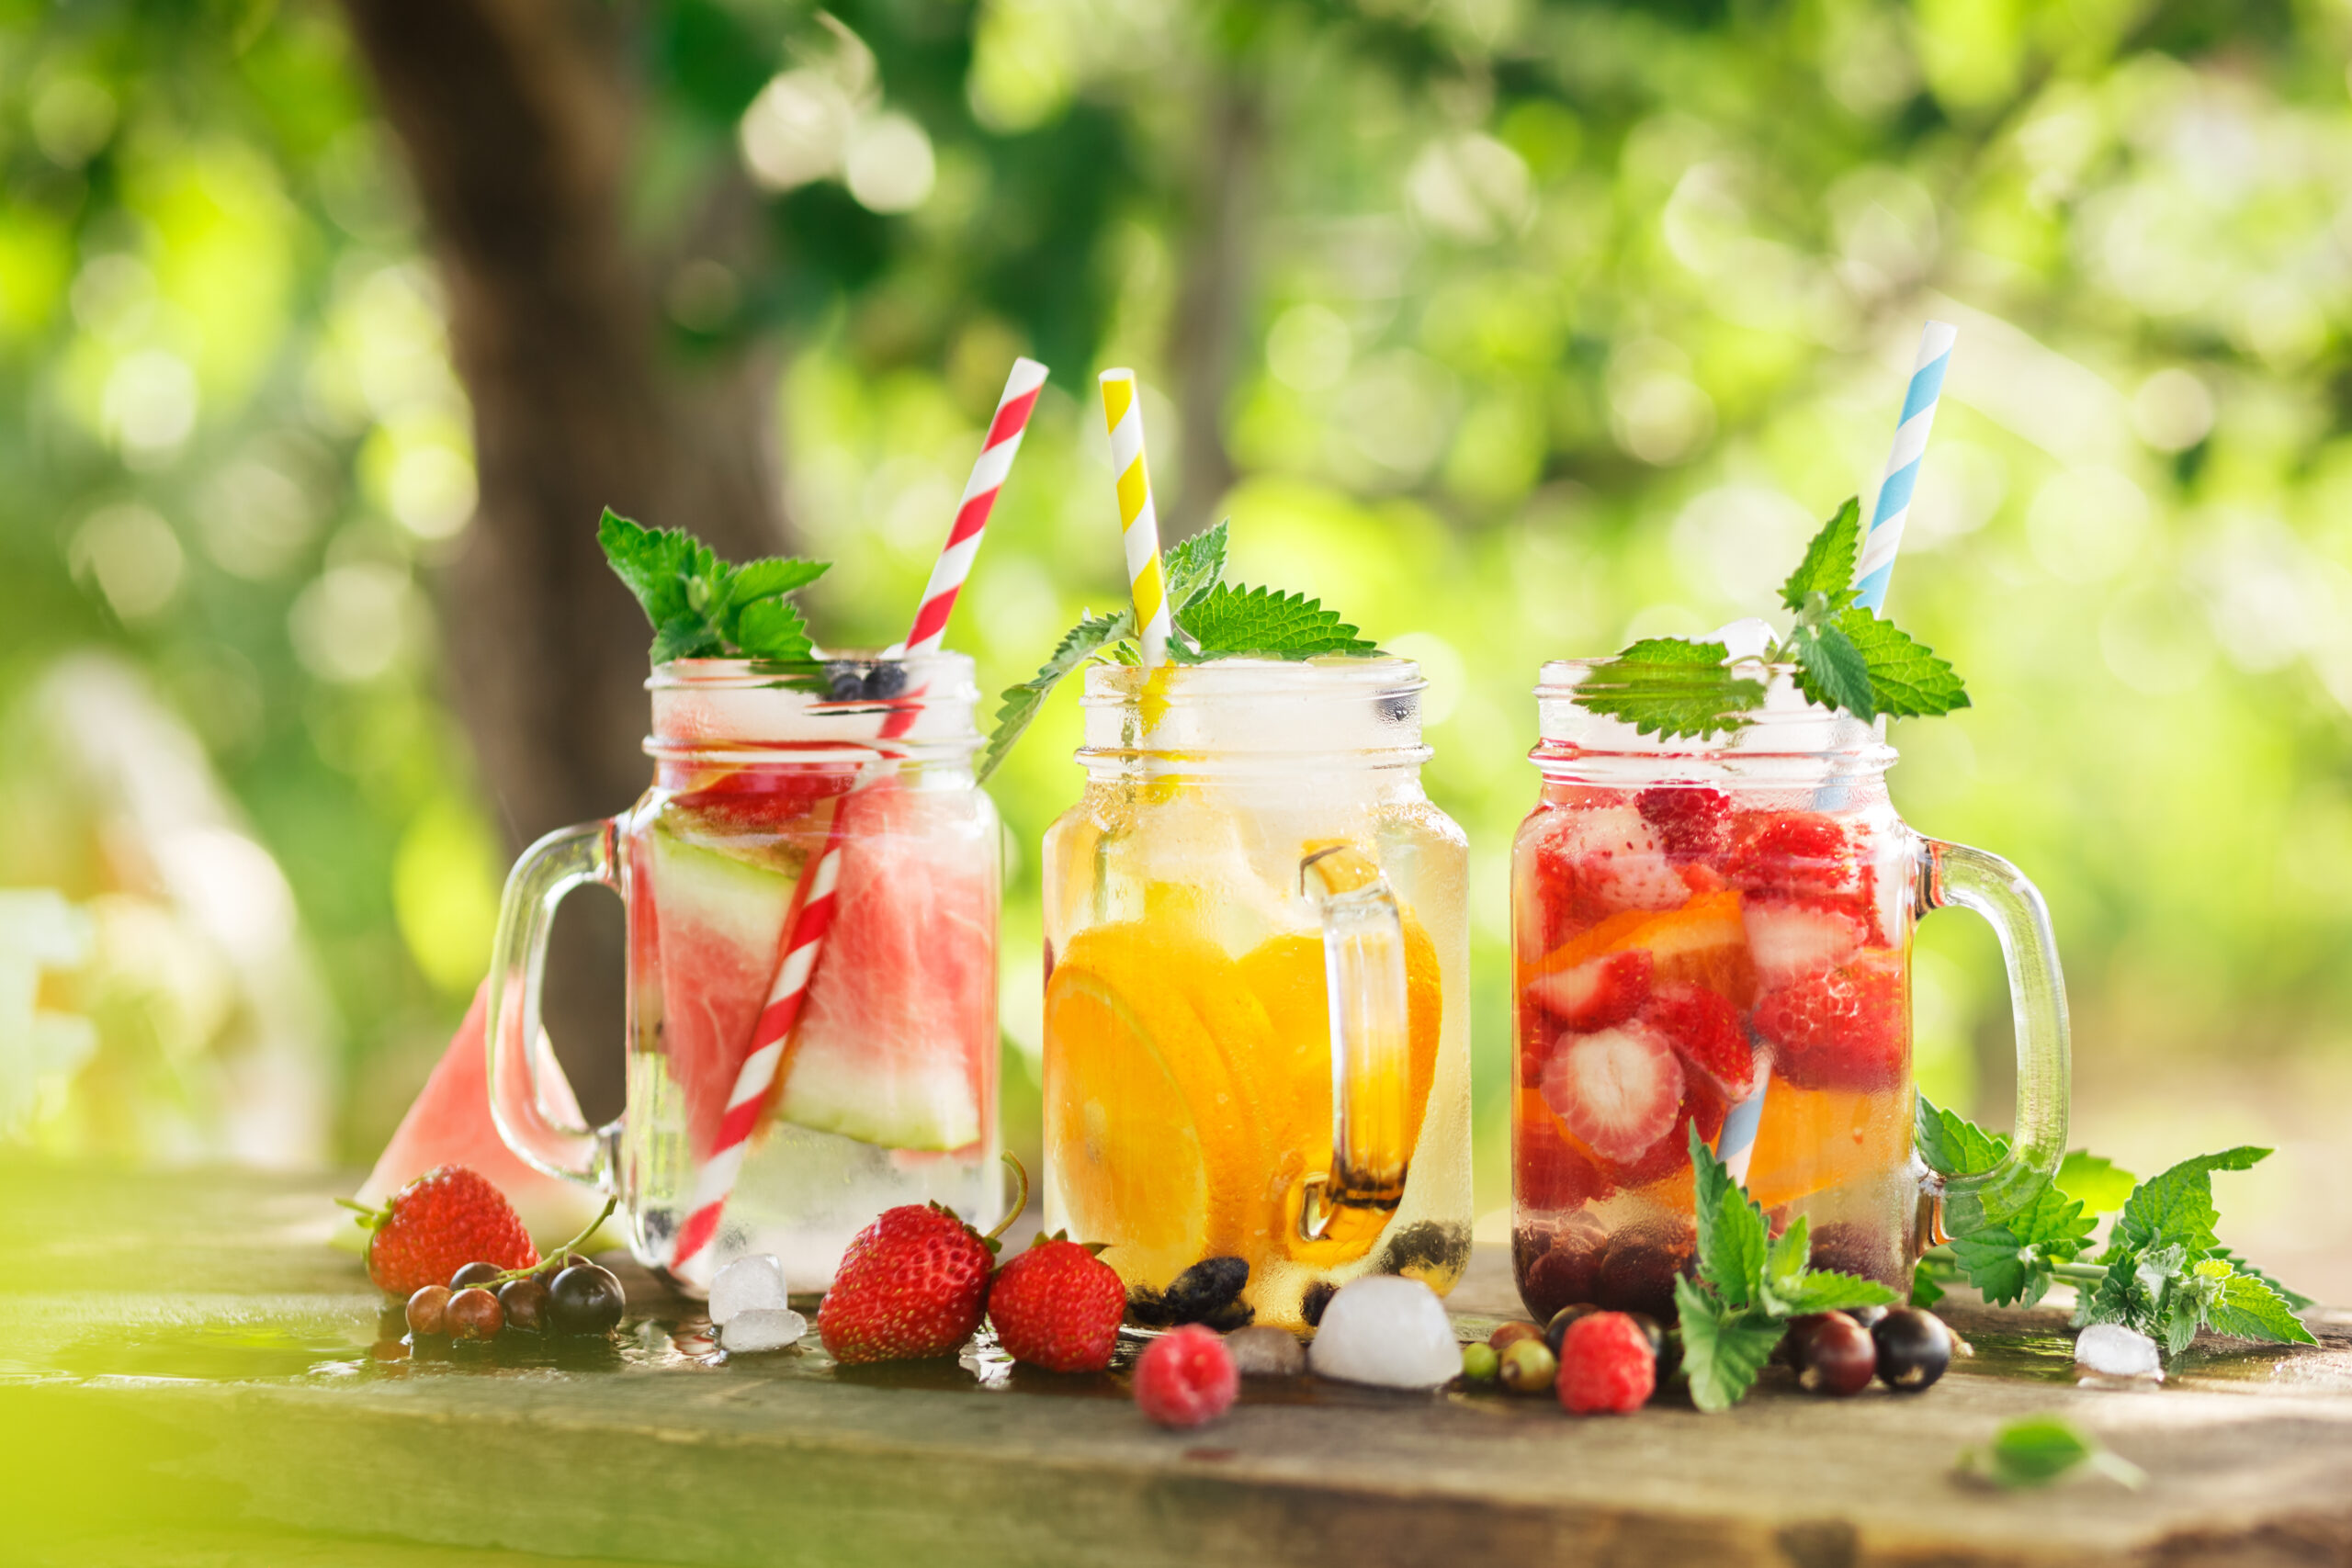 Three mason jar beverages filled with colorful fruit-infused water, garnished with berries and mint leaves. Each jar has a striped straw: red, yellow, and blue, respectively. The jars sit on a wooden surface with a blurred green, outdoorsy background.